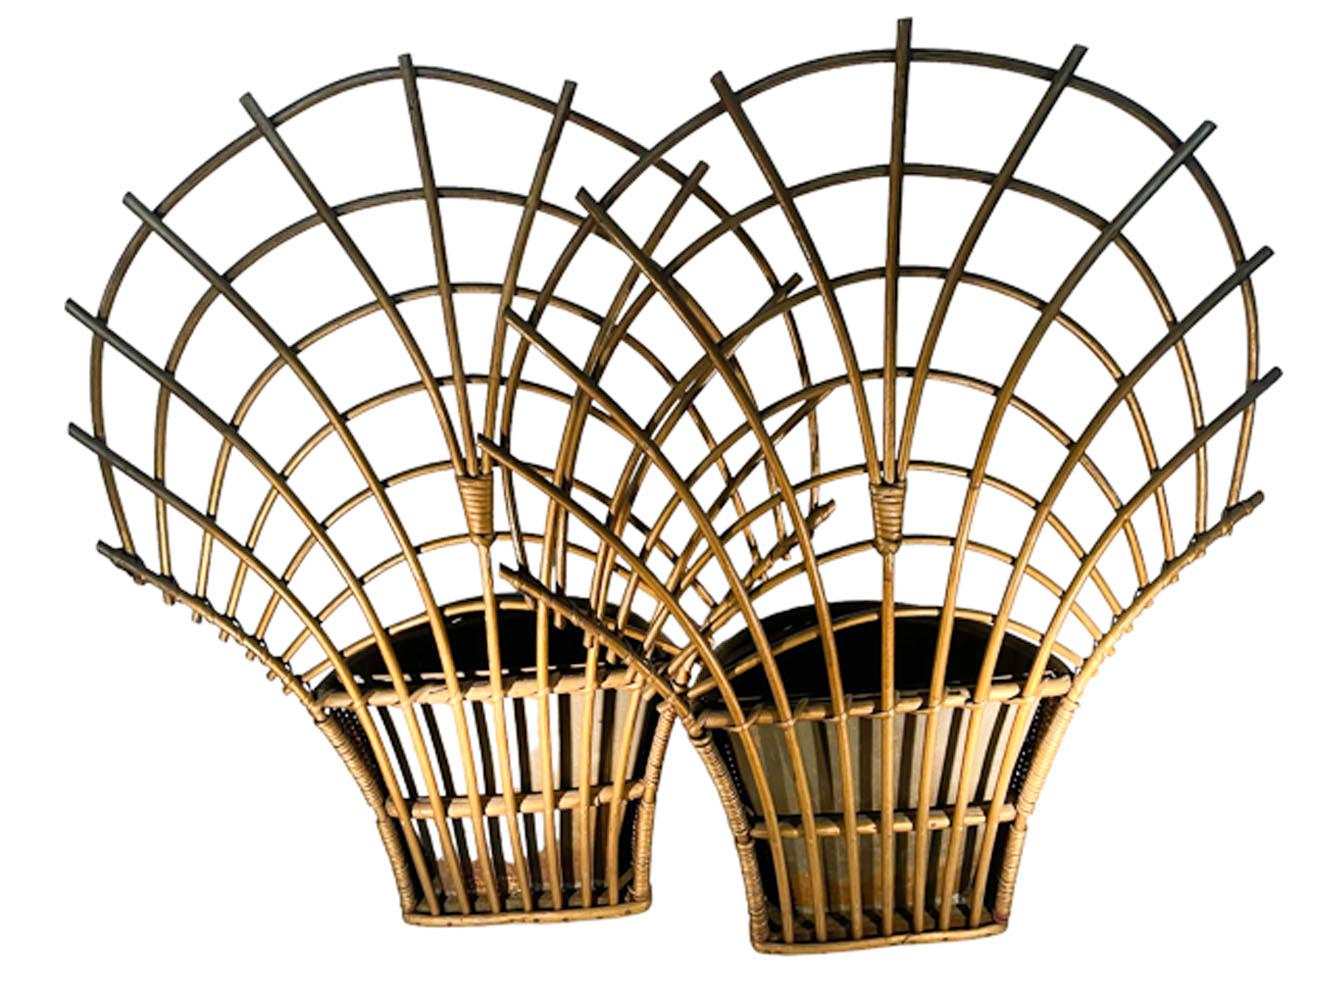 Pair of Art Deco Wicker Wall Planters with Trellis Backs in Original Condition For Sale 1